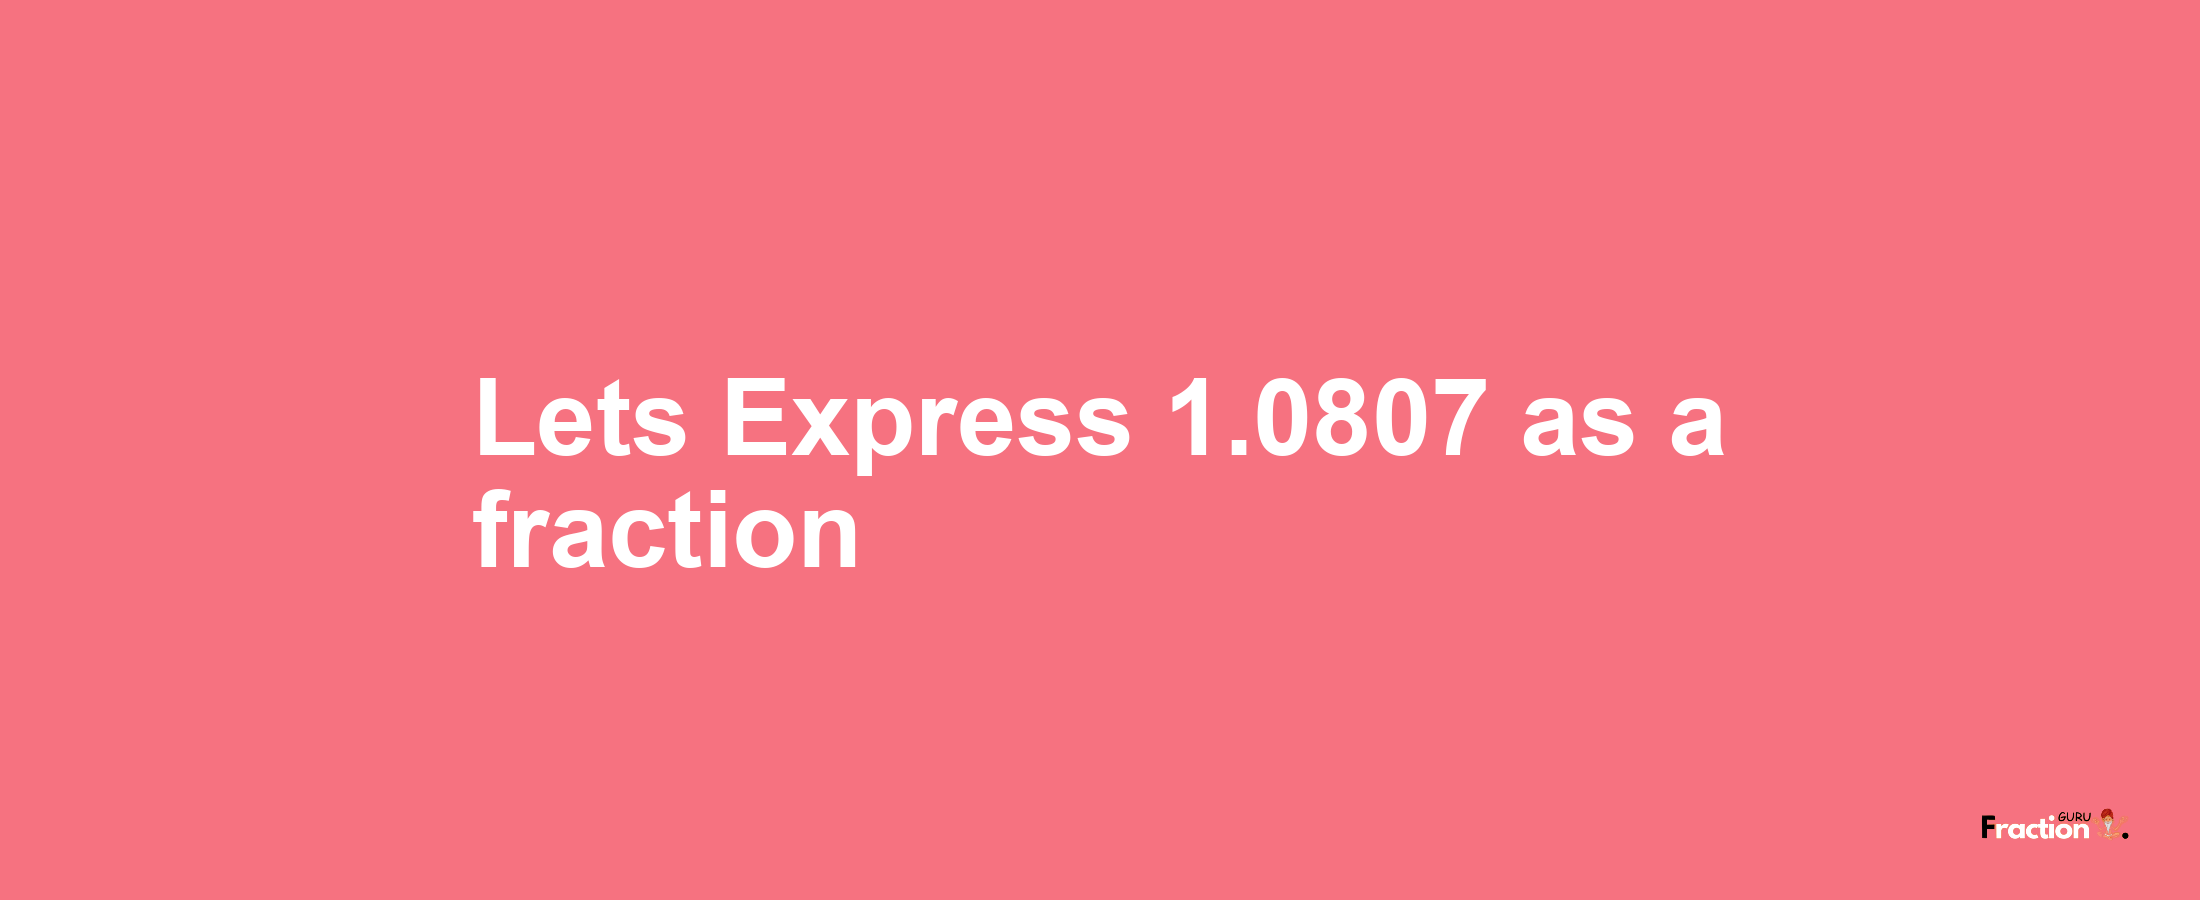 Lets Express 1.0807 as afraction